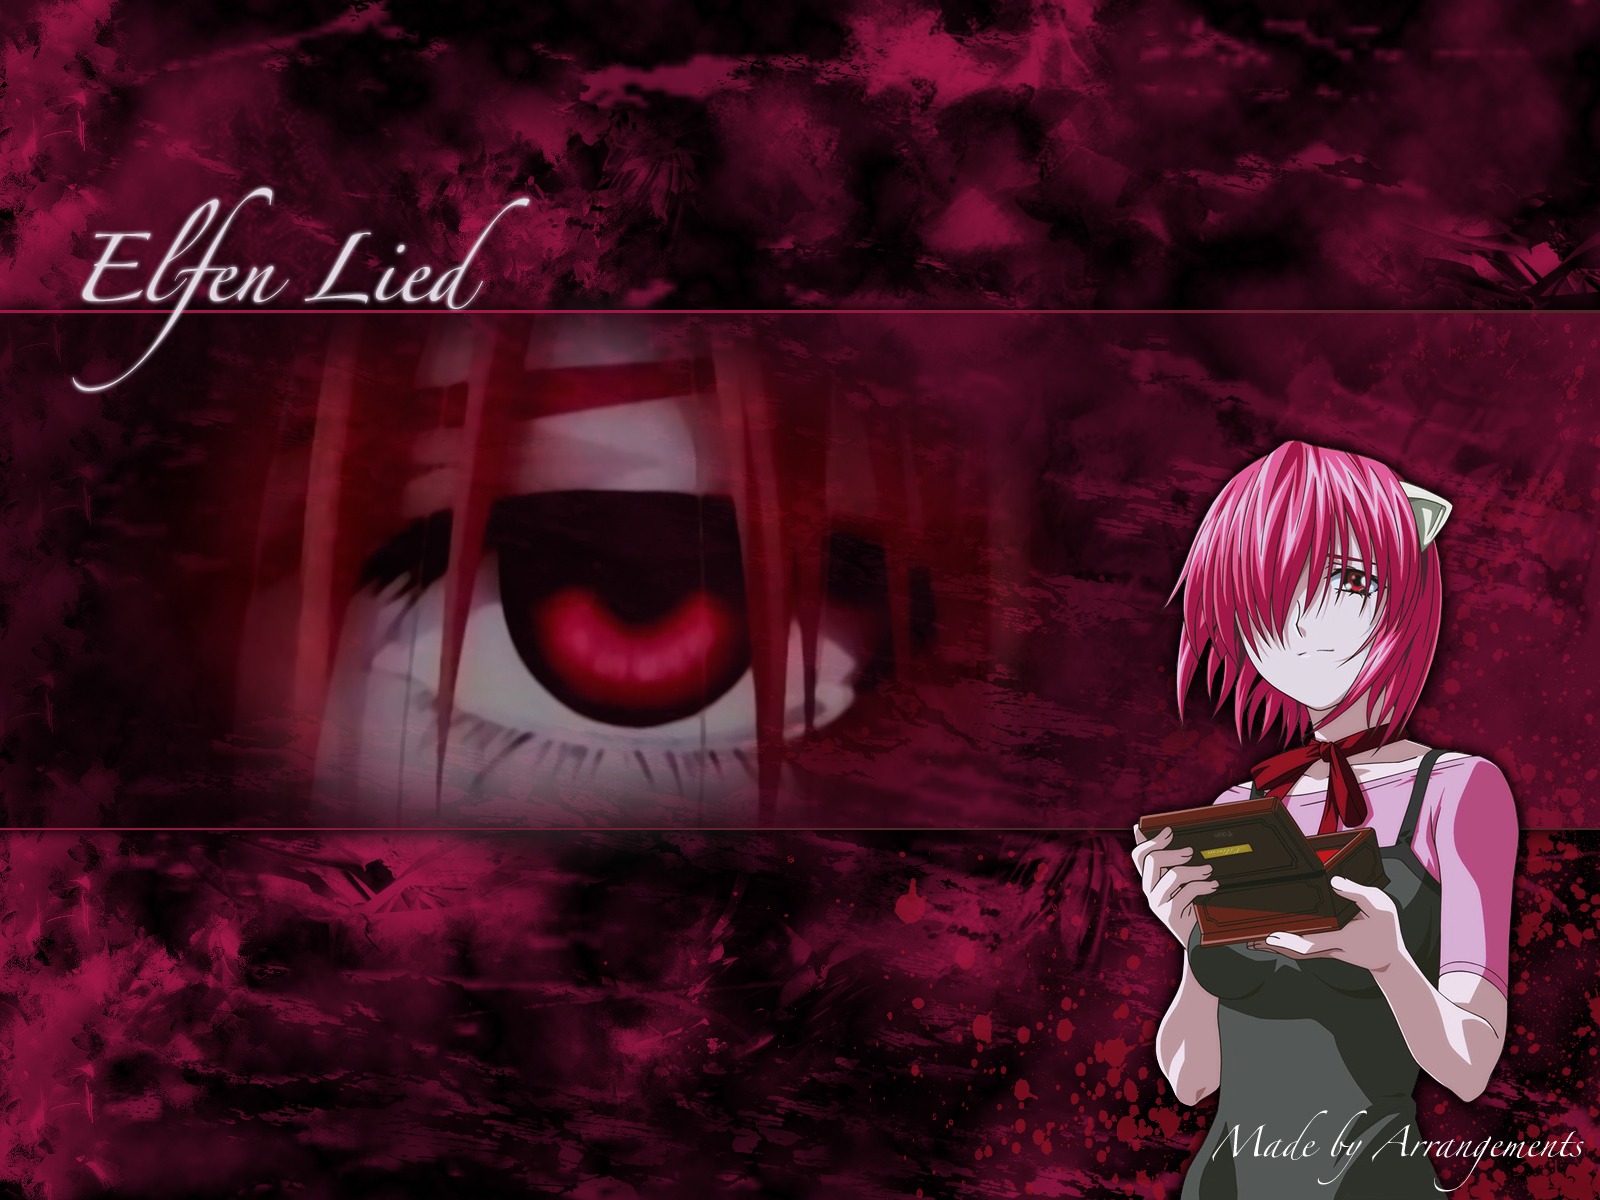 Anime character Lucy from Elfen Lied, with striking pink hair.